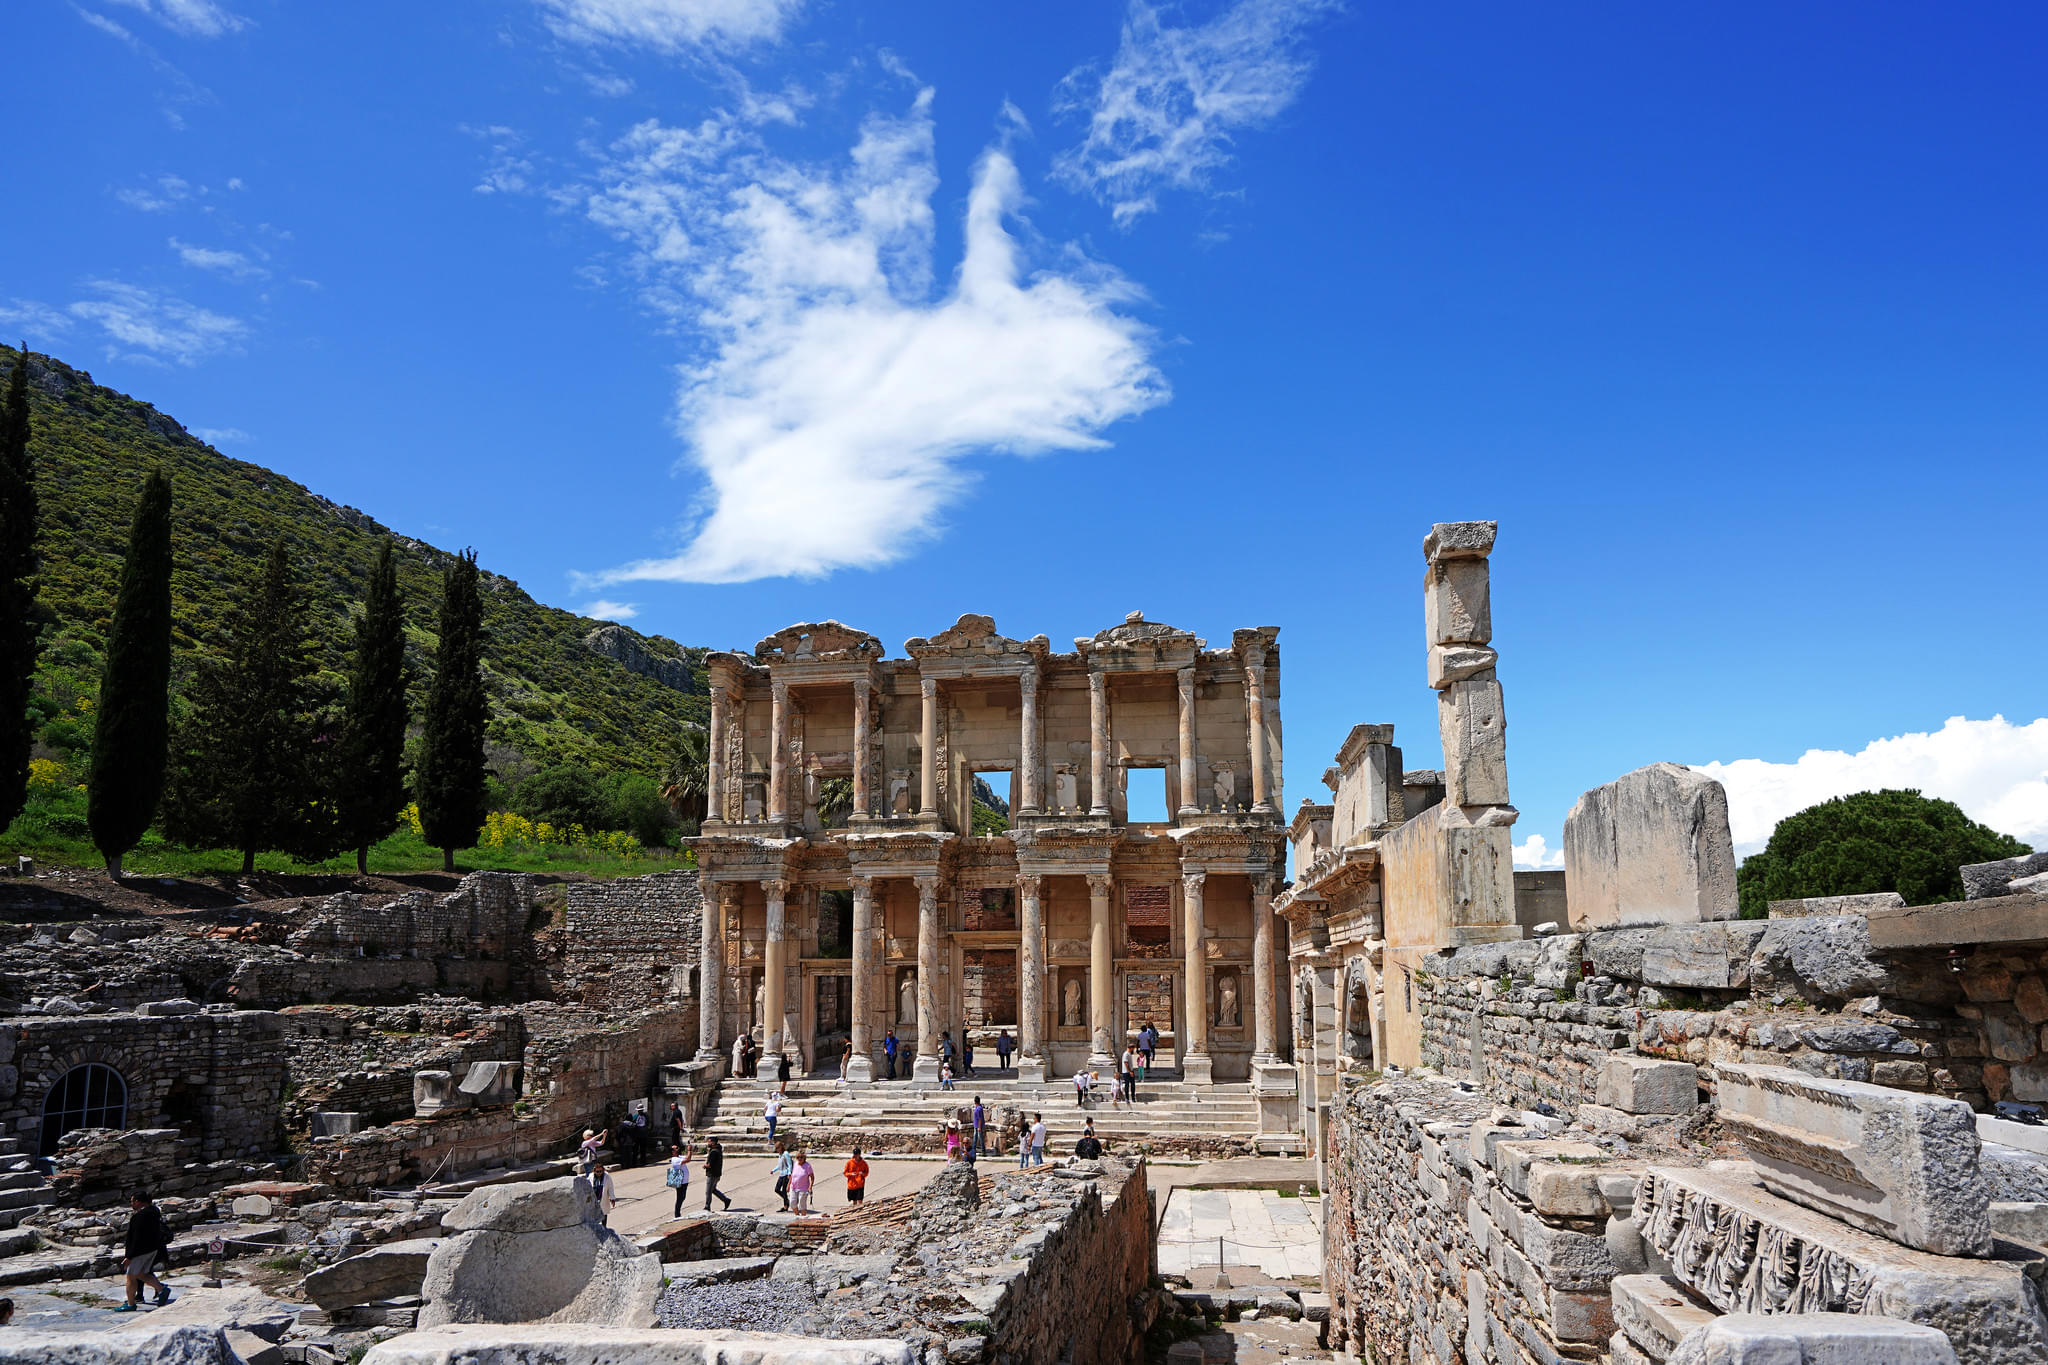 Wander through the Library of Celsus